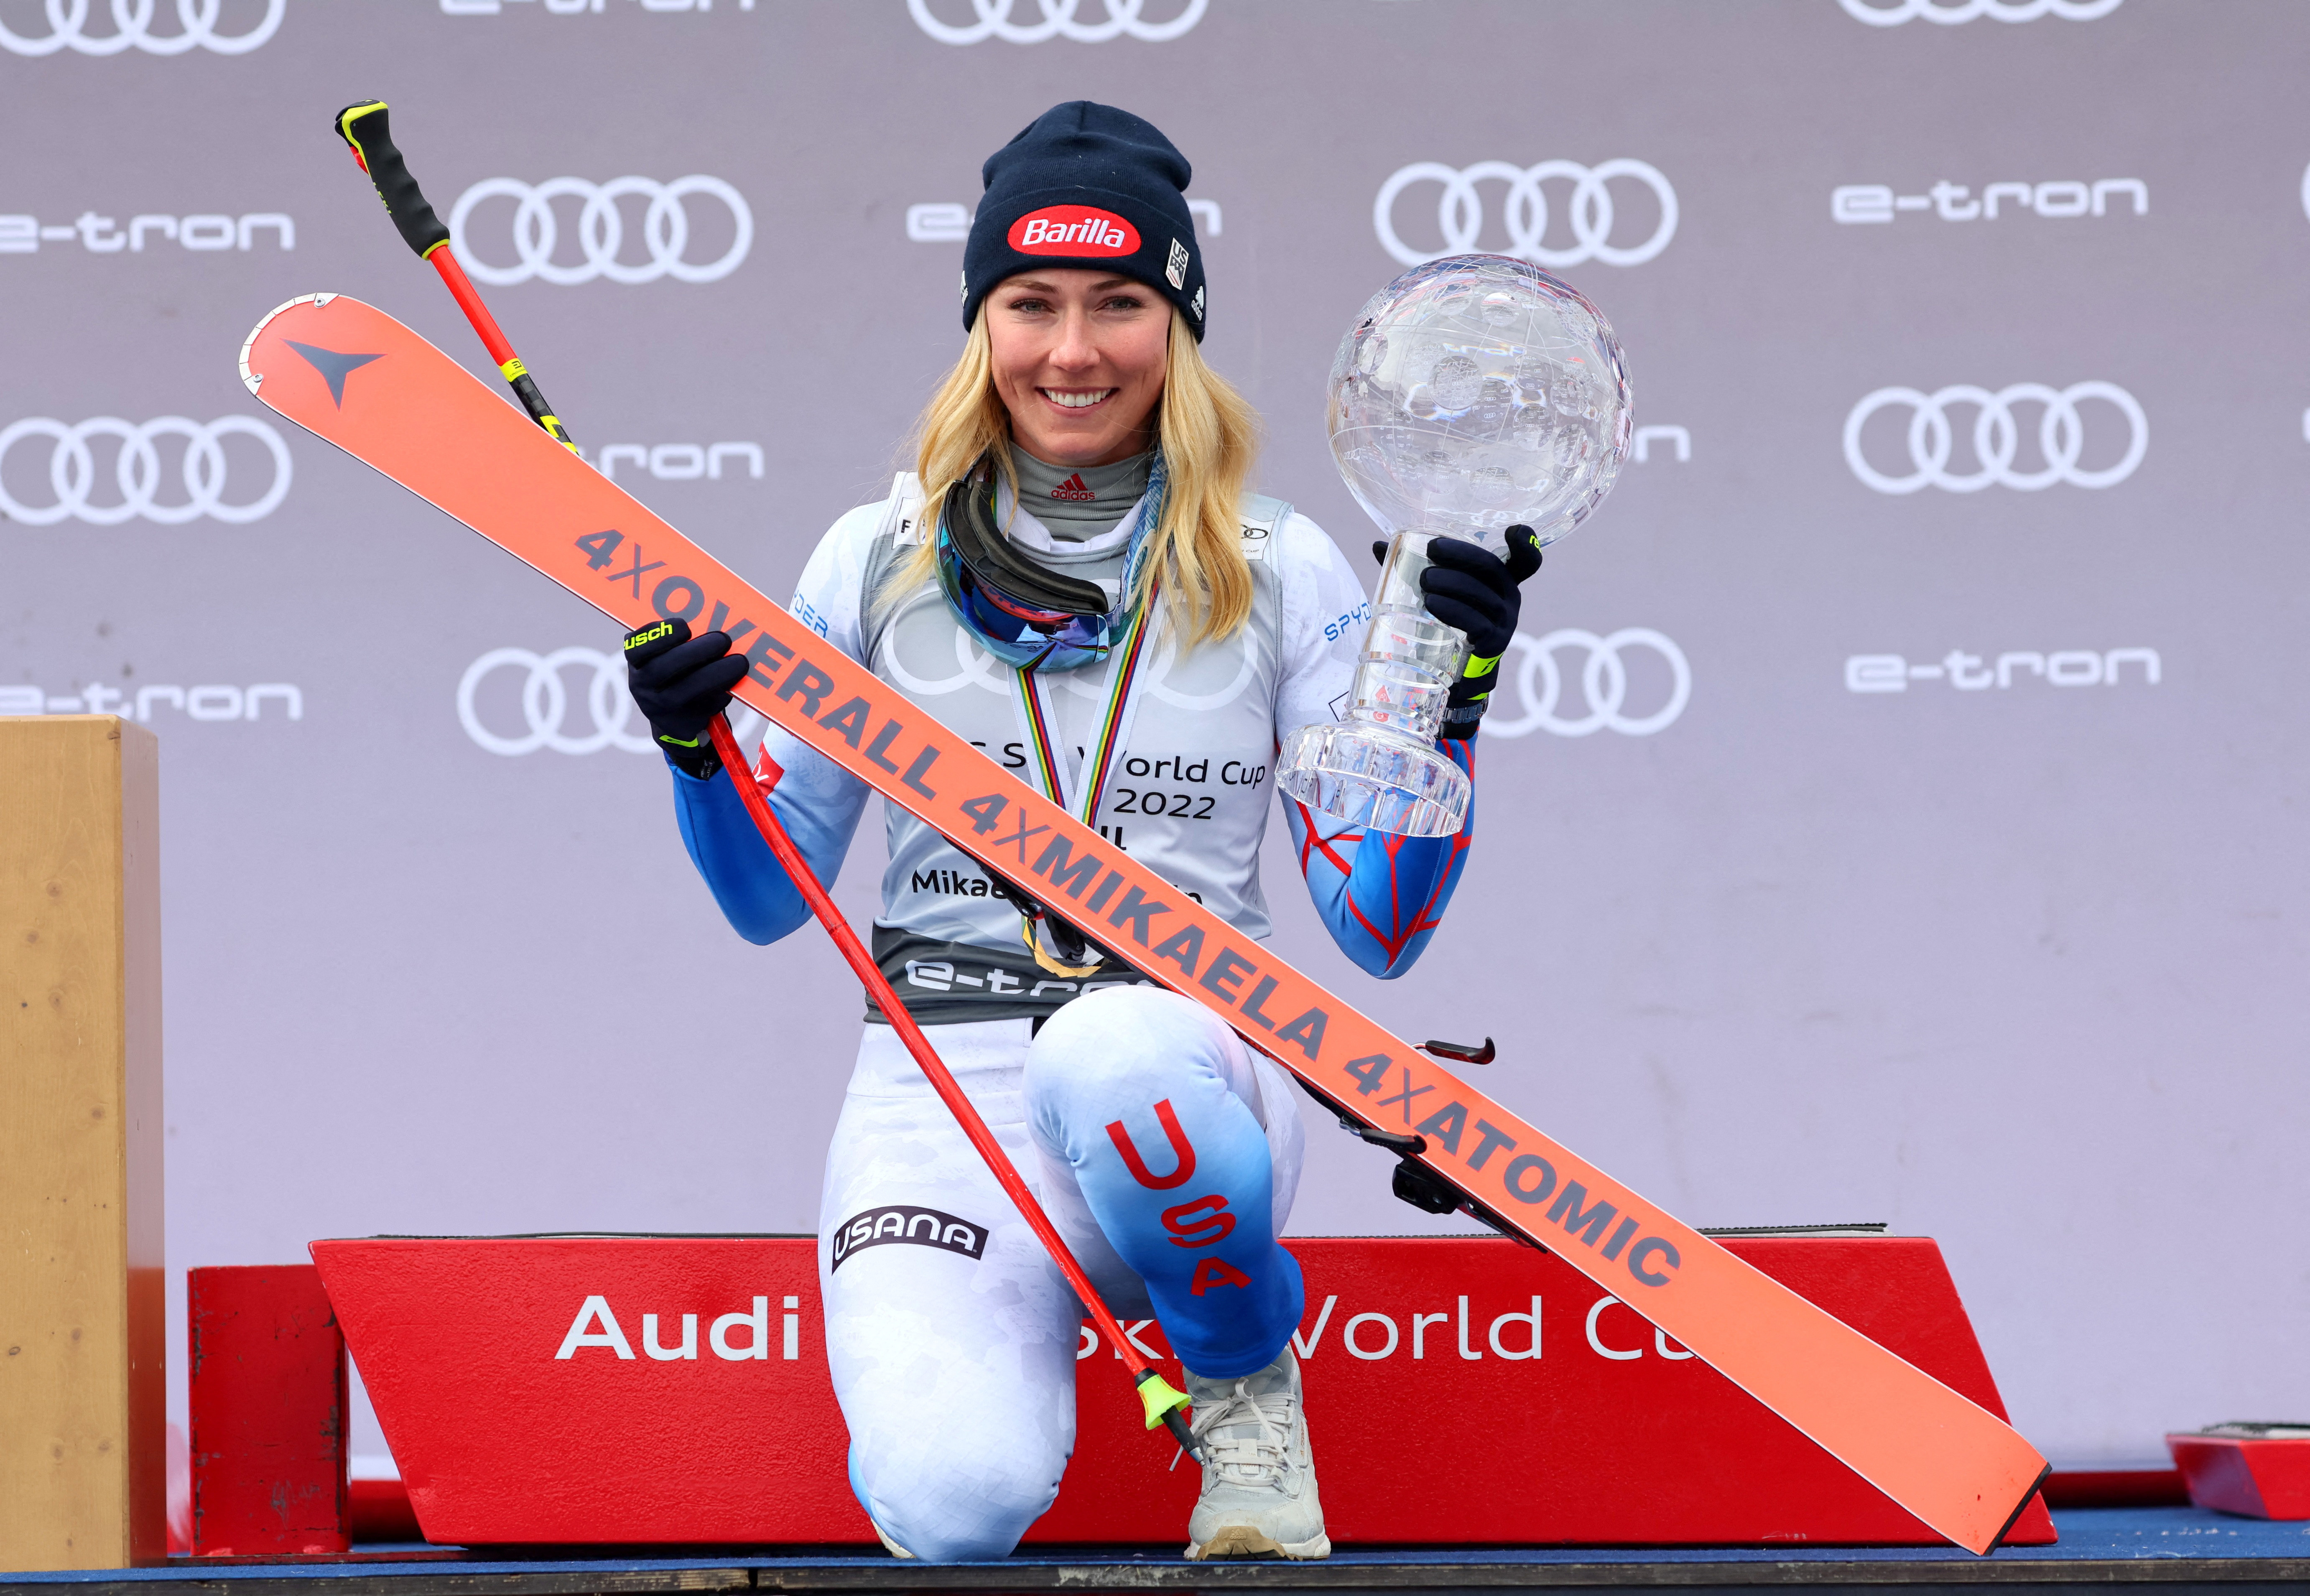 Mikaela Shiffrin wins again and moves closer to all-time win mark